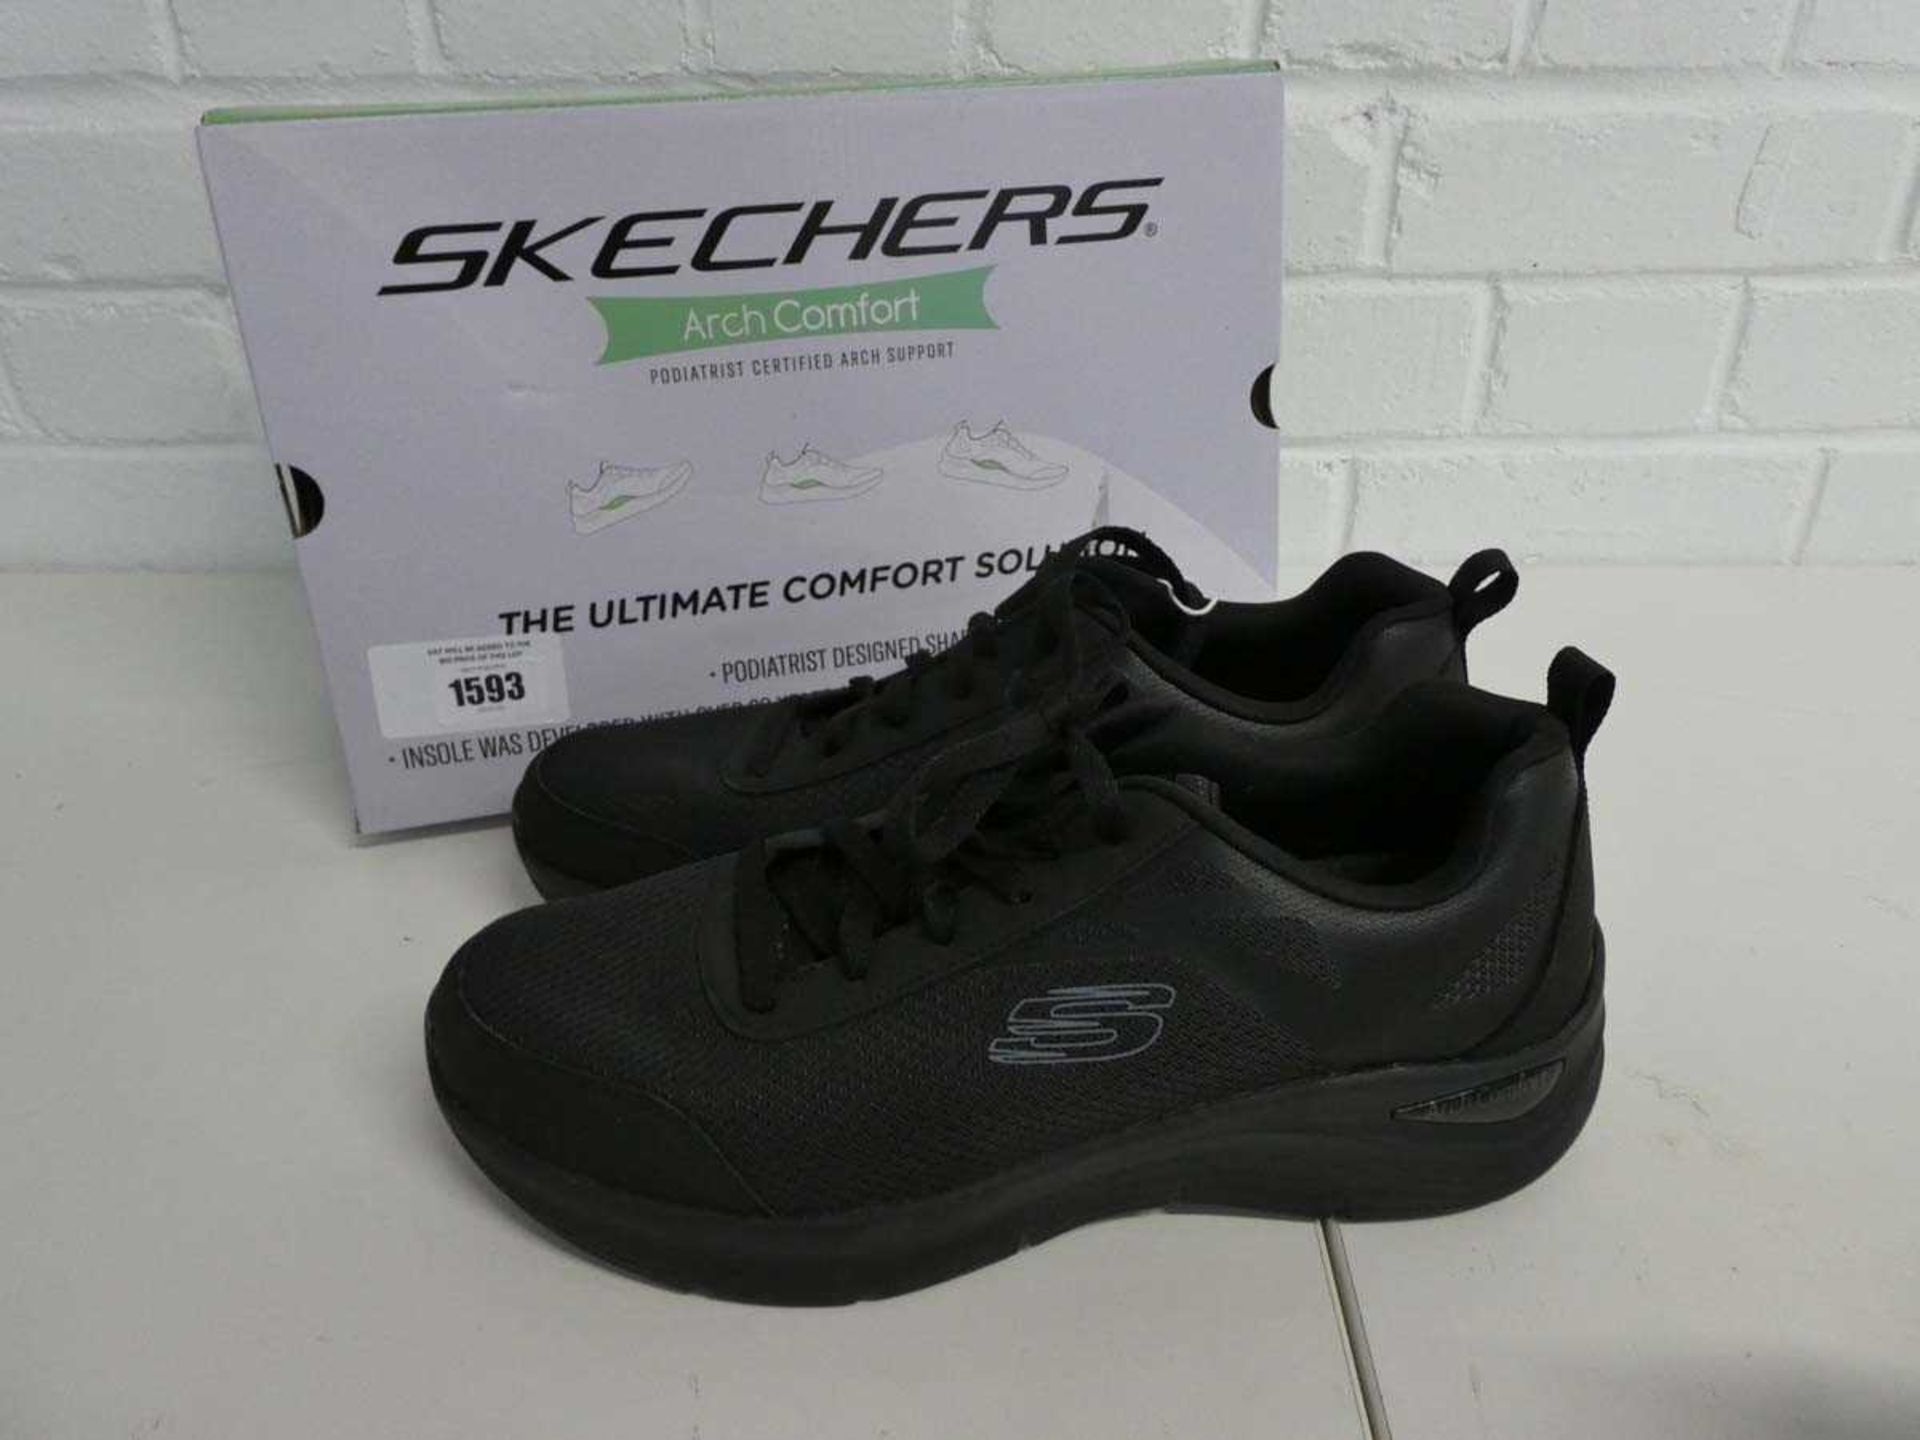 +VAT Boxed pair of Skechers arch comfort trainers in black size 10